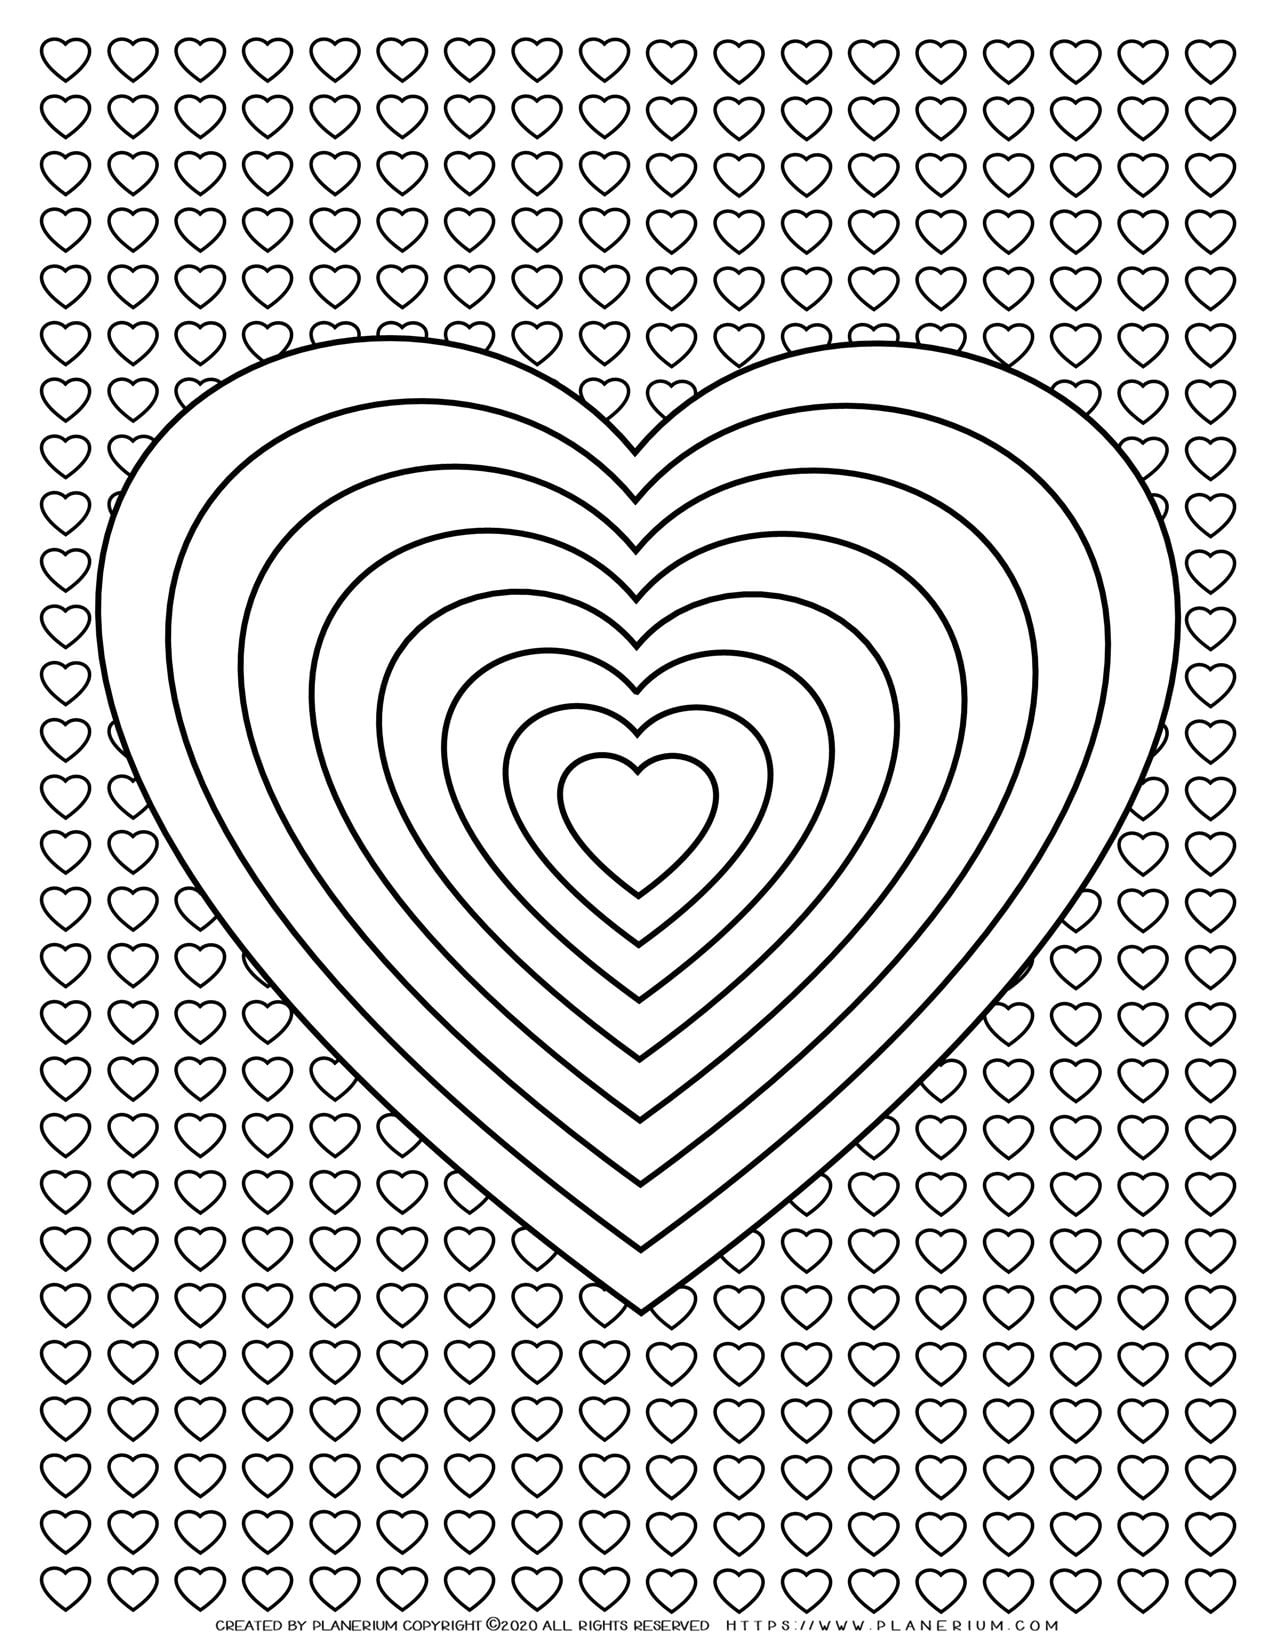 Valentines Day - Coloring Page - Heart Riddles With Hearts Background | Planerium